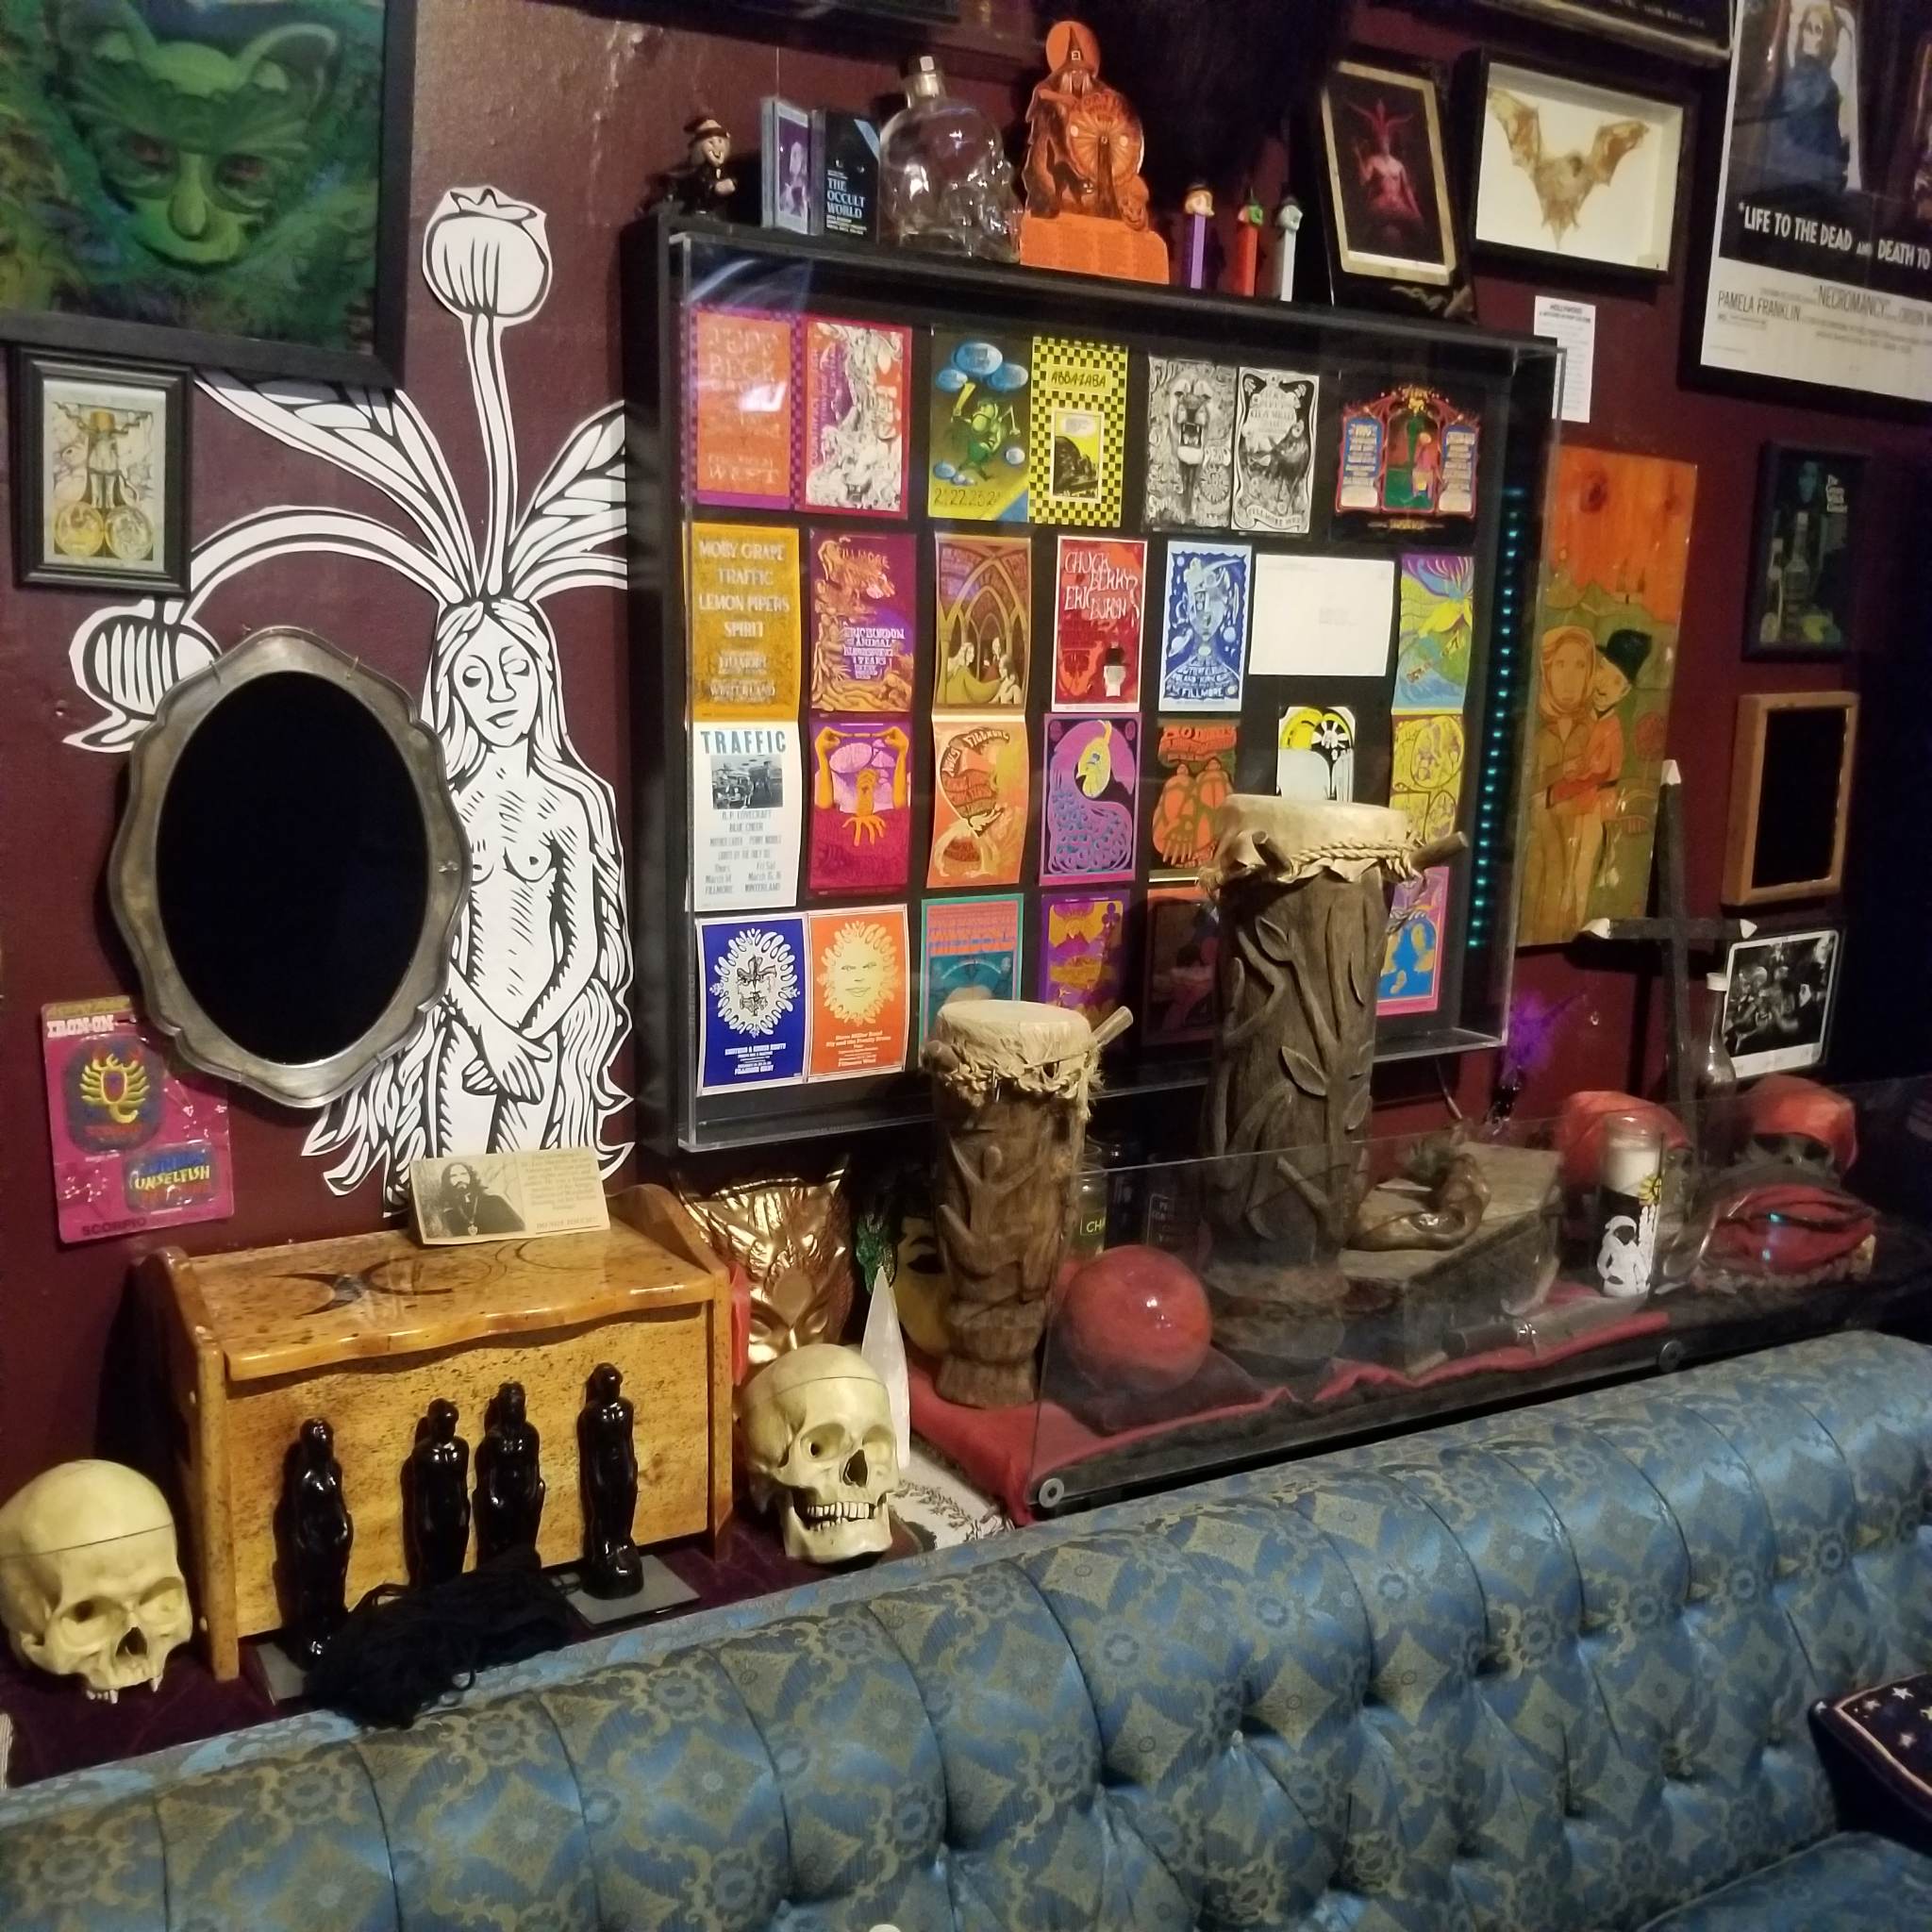 A Visit to the Buckland Museum of Witchcraft – Tasseography, Ouija, Witchcraft Antiques, Giger Art & a Michelle Belanger Collection & so much more!